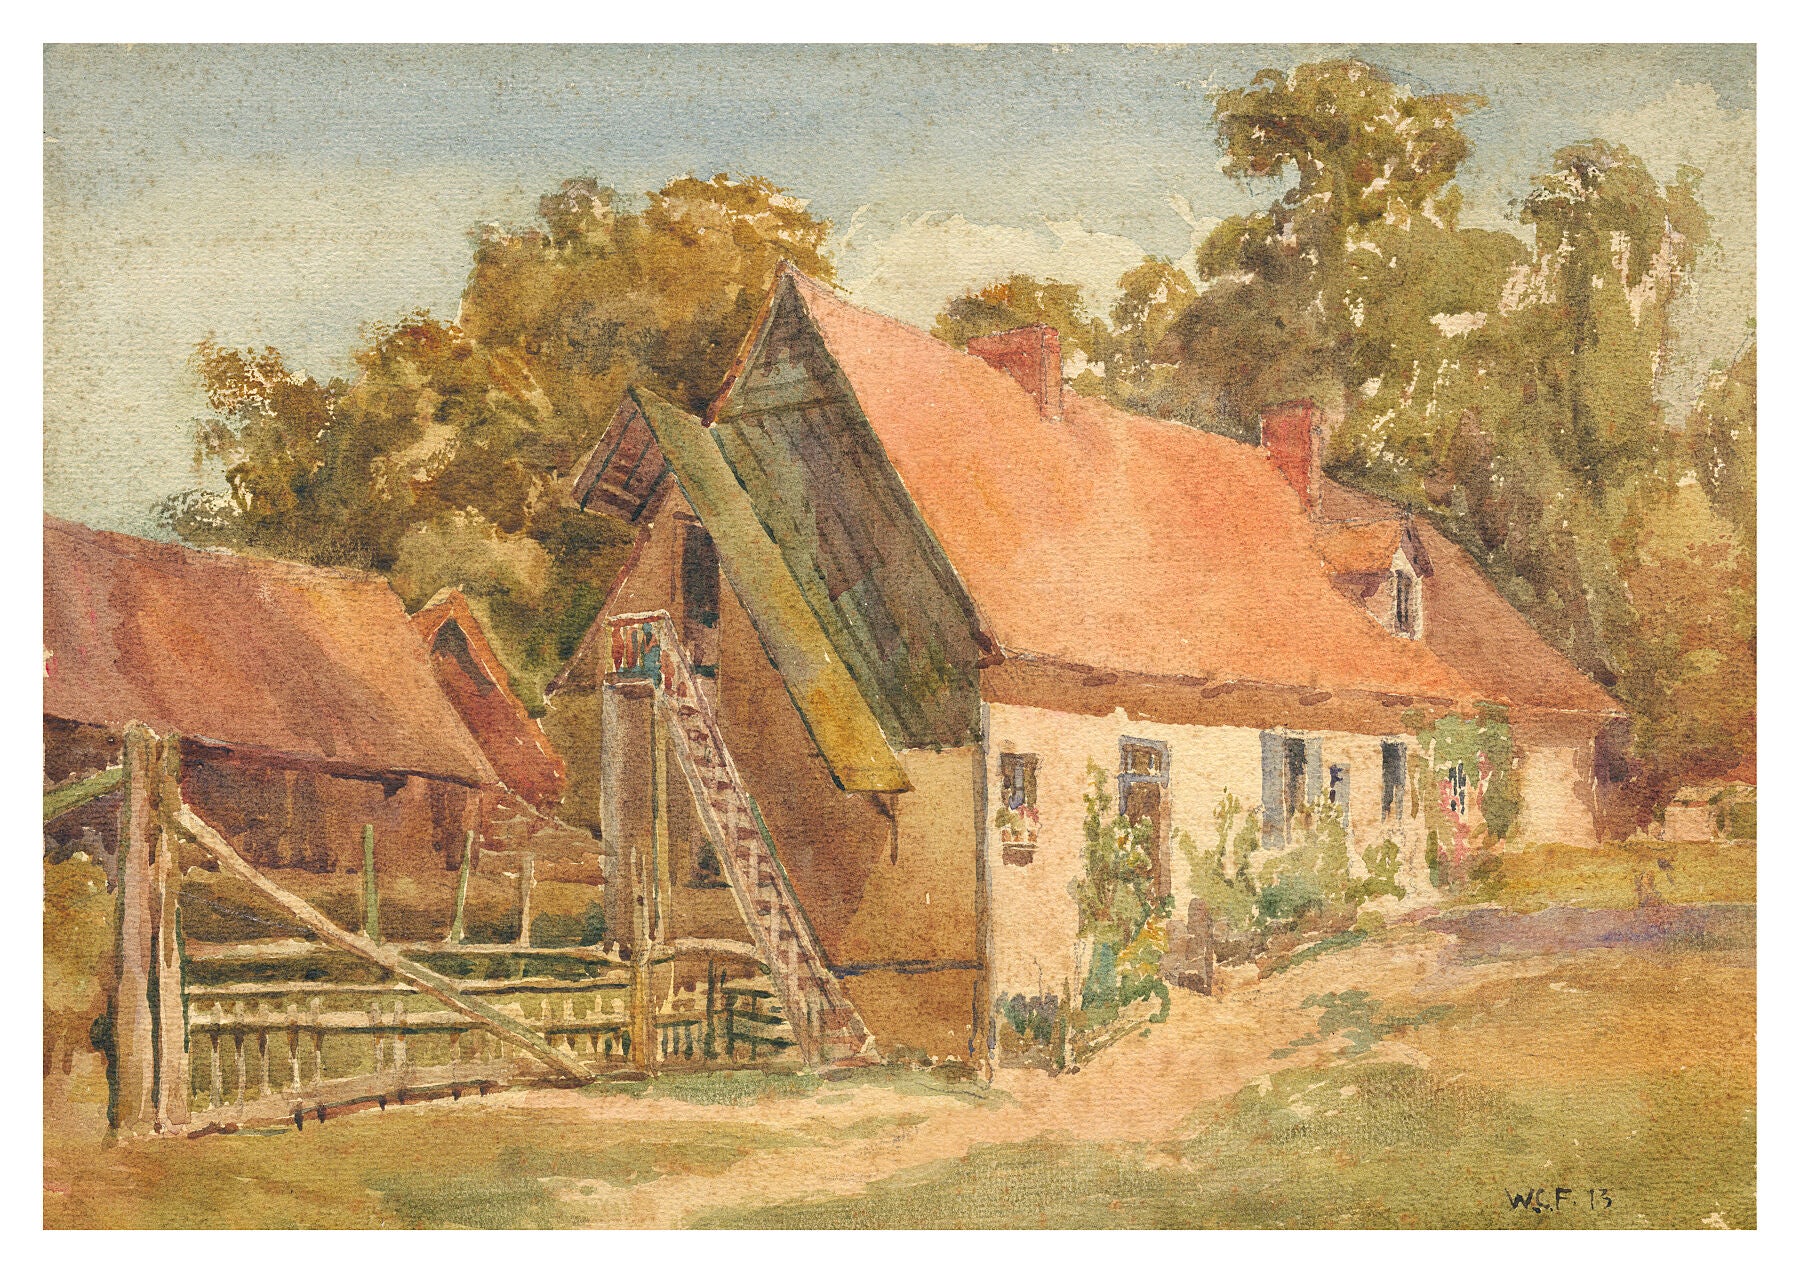 Reproduction watercolour painting of Farmhouse by Walter C Foster